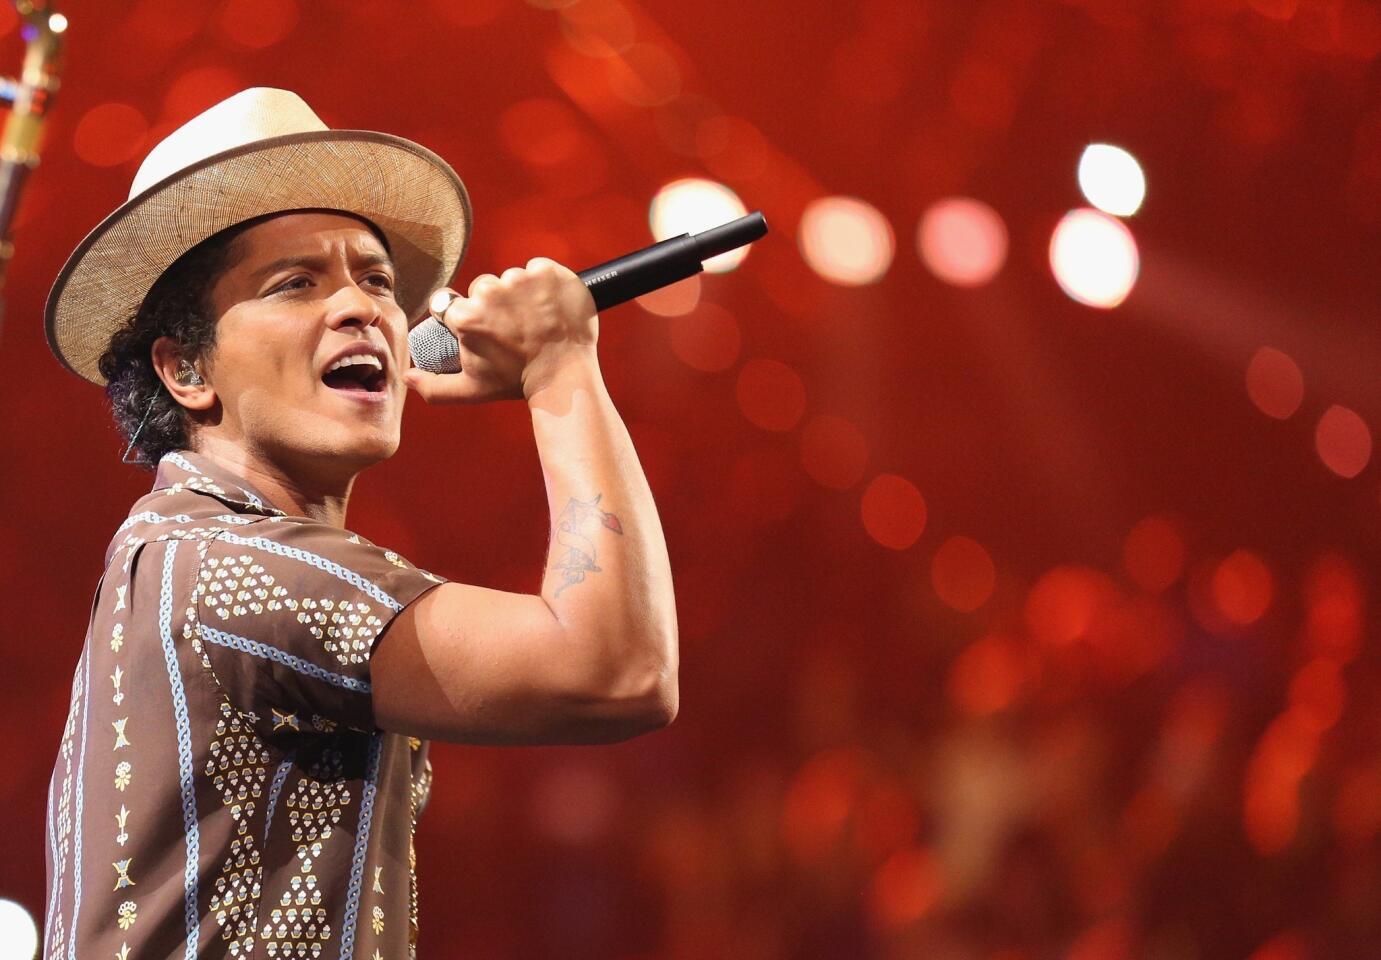 Singer Bruno Mars, shown performing during the iHeartRadio Music Festival at the MGM Grand in Las Vegas in September, is among the 2014 Headwear Hall of Fame inductees.